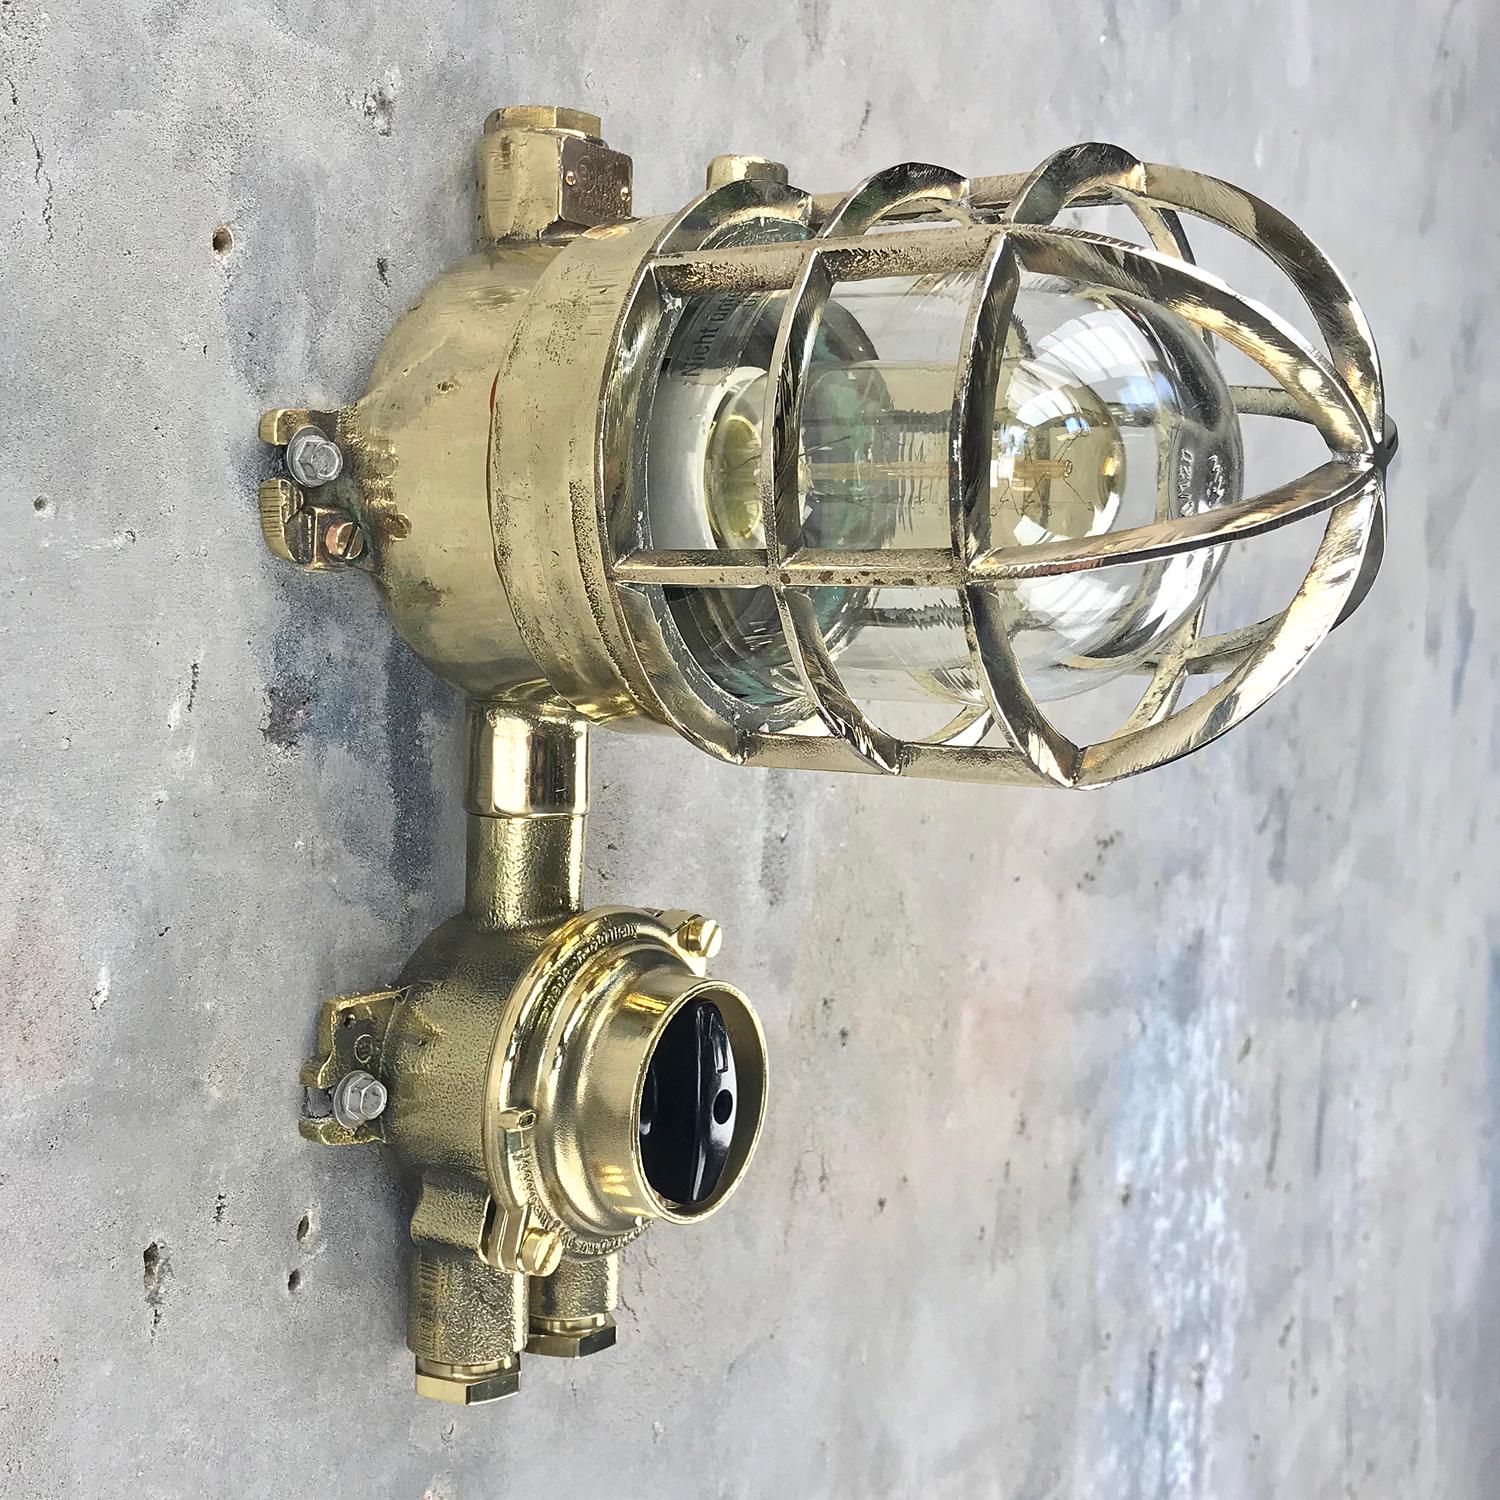 1970s German Explosion Proof Wall Light Cast Brass, Glass Shade & Rotary Switch For Sale 1